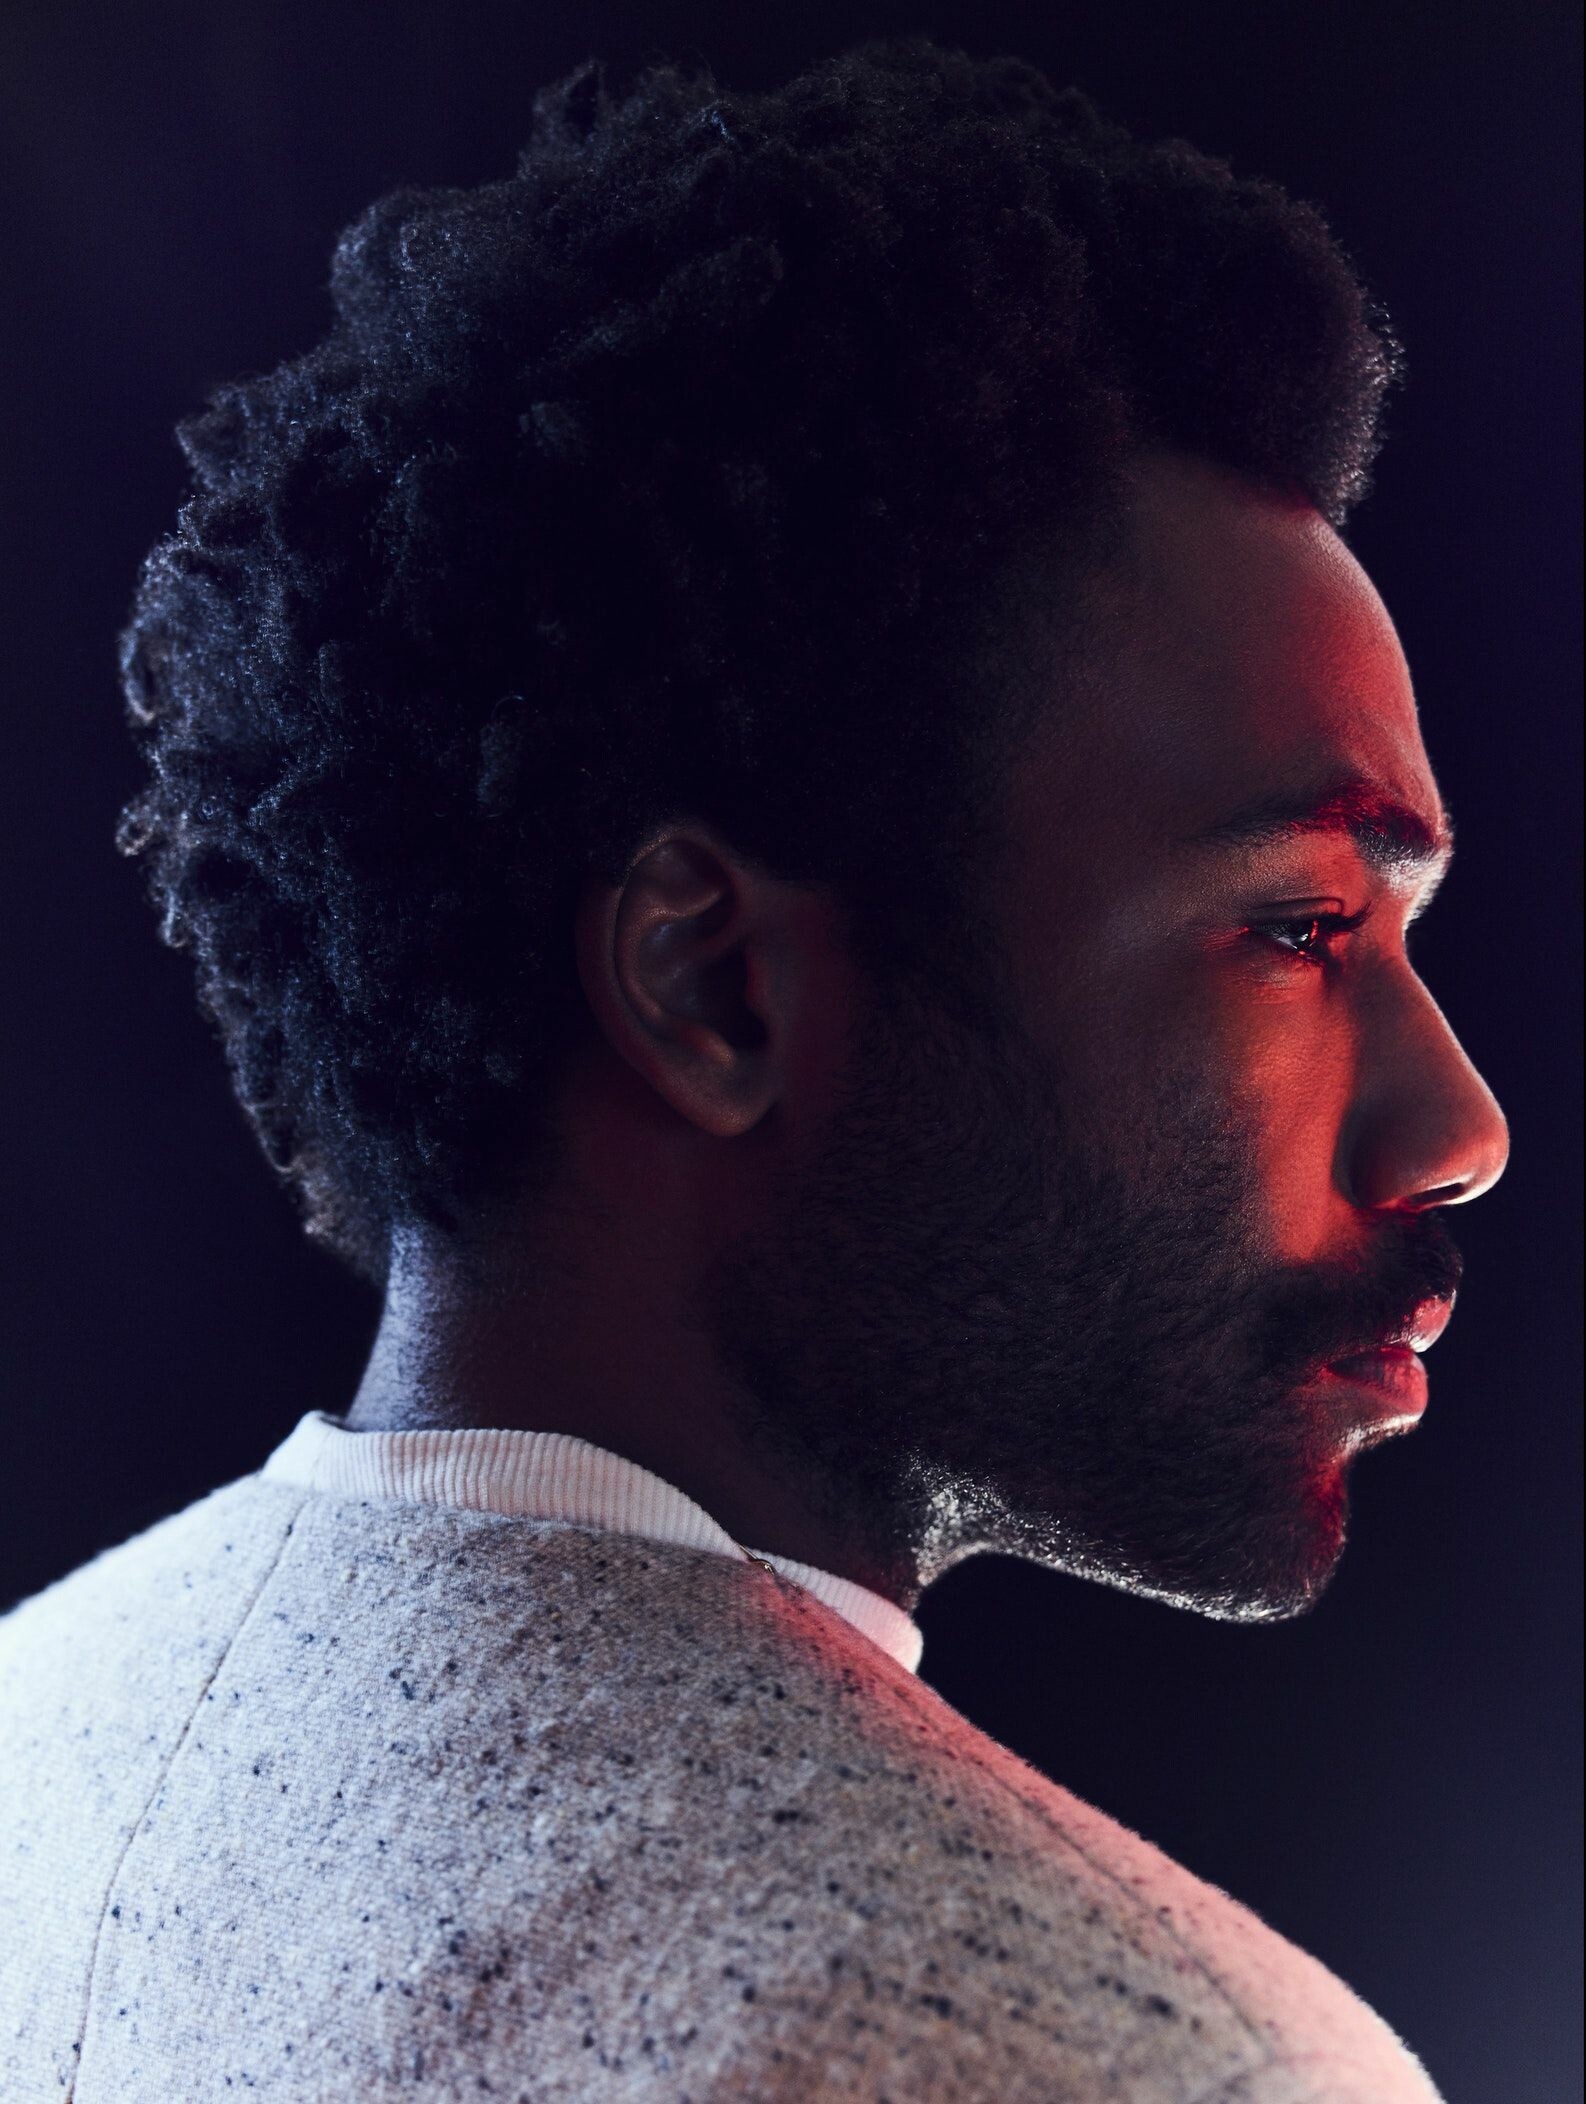 Donald Glover: Childish Gambino, "Heartbeat" reached 18 on the US Bubbling Under Hot 100 Singles. 1590x2110 HD Wallpaper.